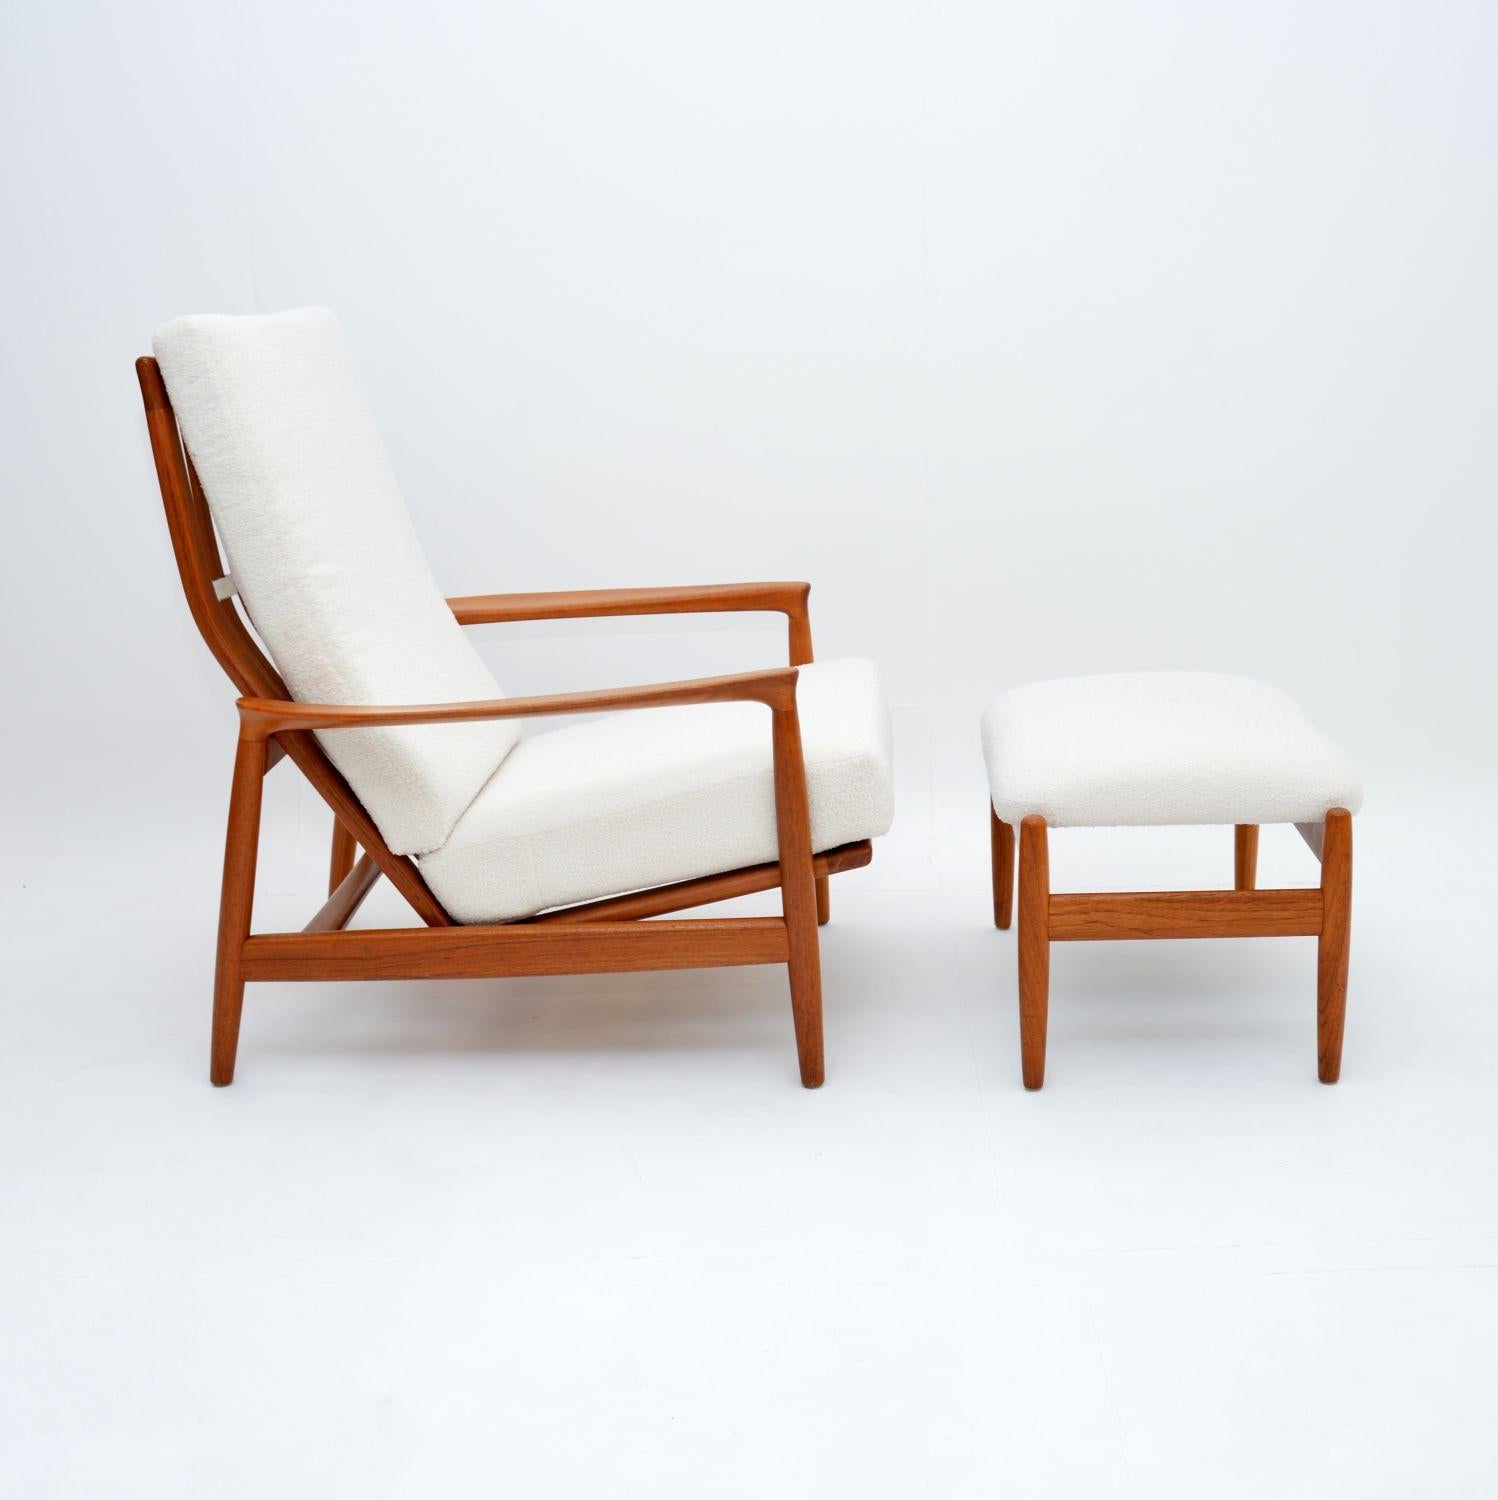 A spectacular and extremely comfortable 1960’s Swedish vintage armchair & stool by Folks Ohlsson in solid teak. Designed by Folke Ohlsson for Dux, these were recently imported from Sweden, they date from the 1960’s.

The quality is outstanding,